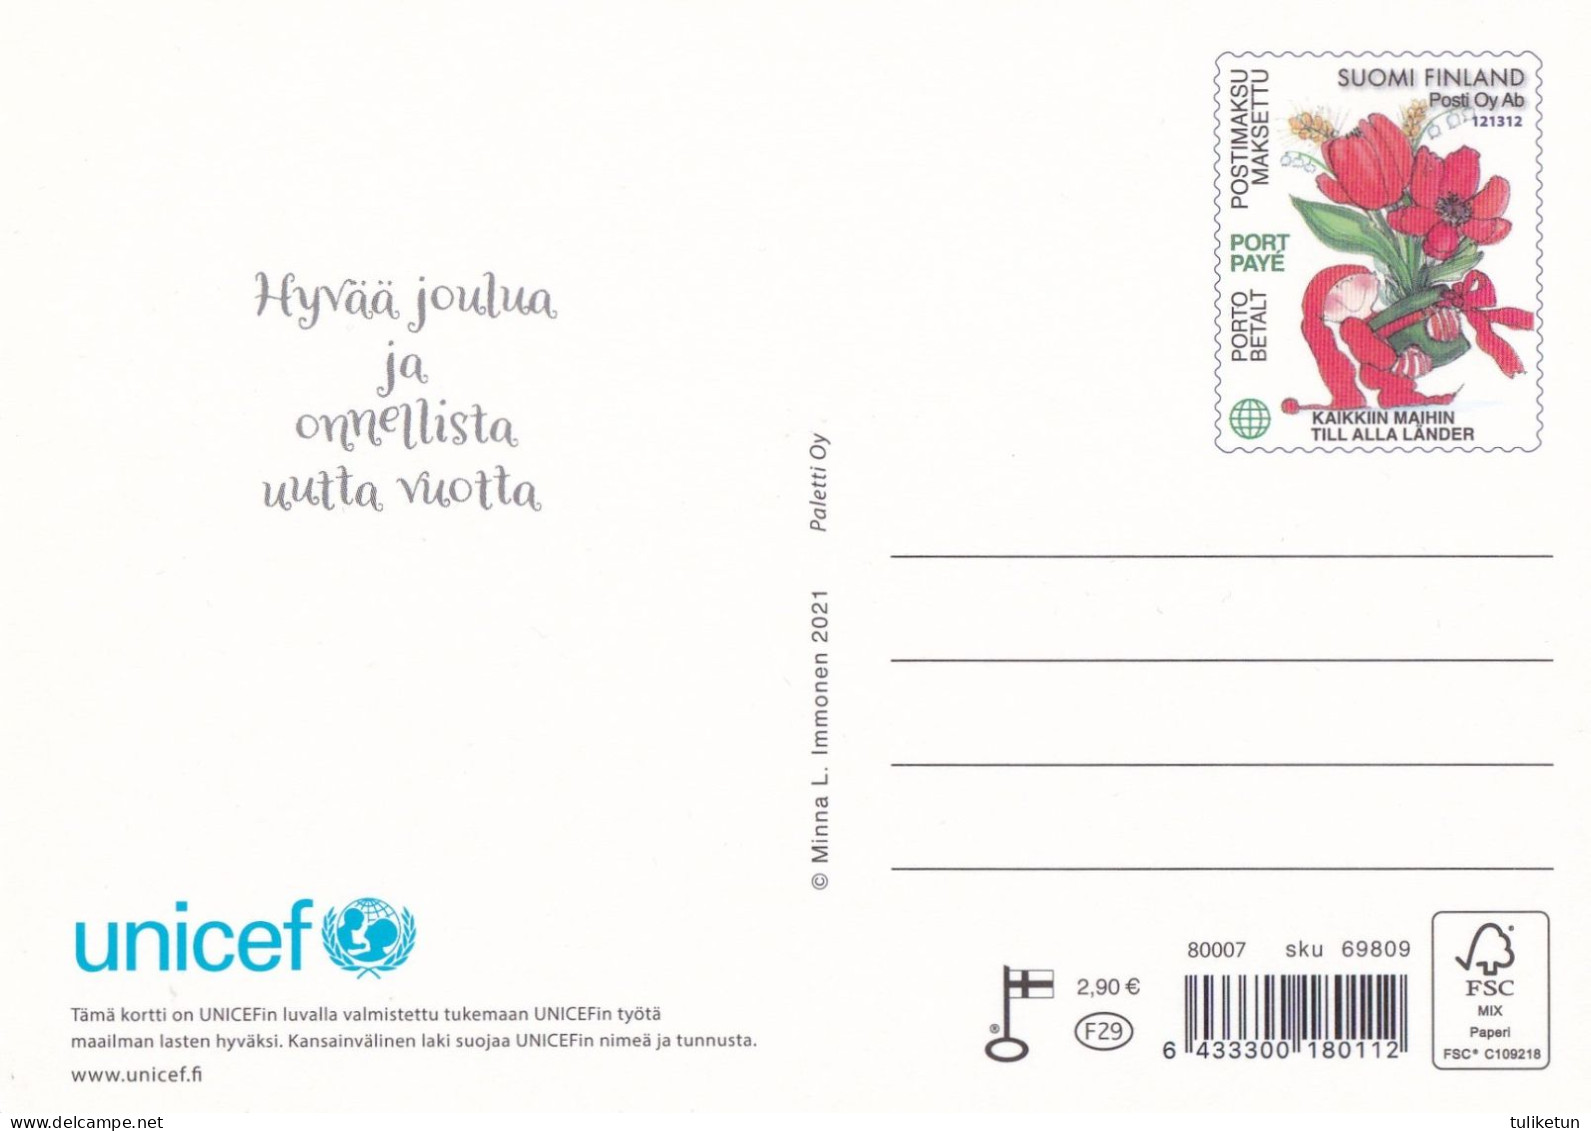 Postal Stationery - Elves - Brownies Holding Candle Lanterns - Unicef 2021 - Suomi Finland - Postage Paid - Interi Postali